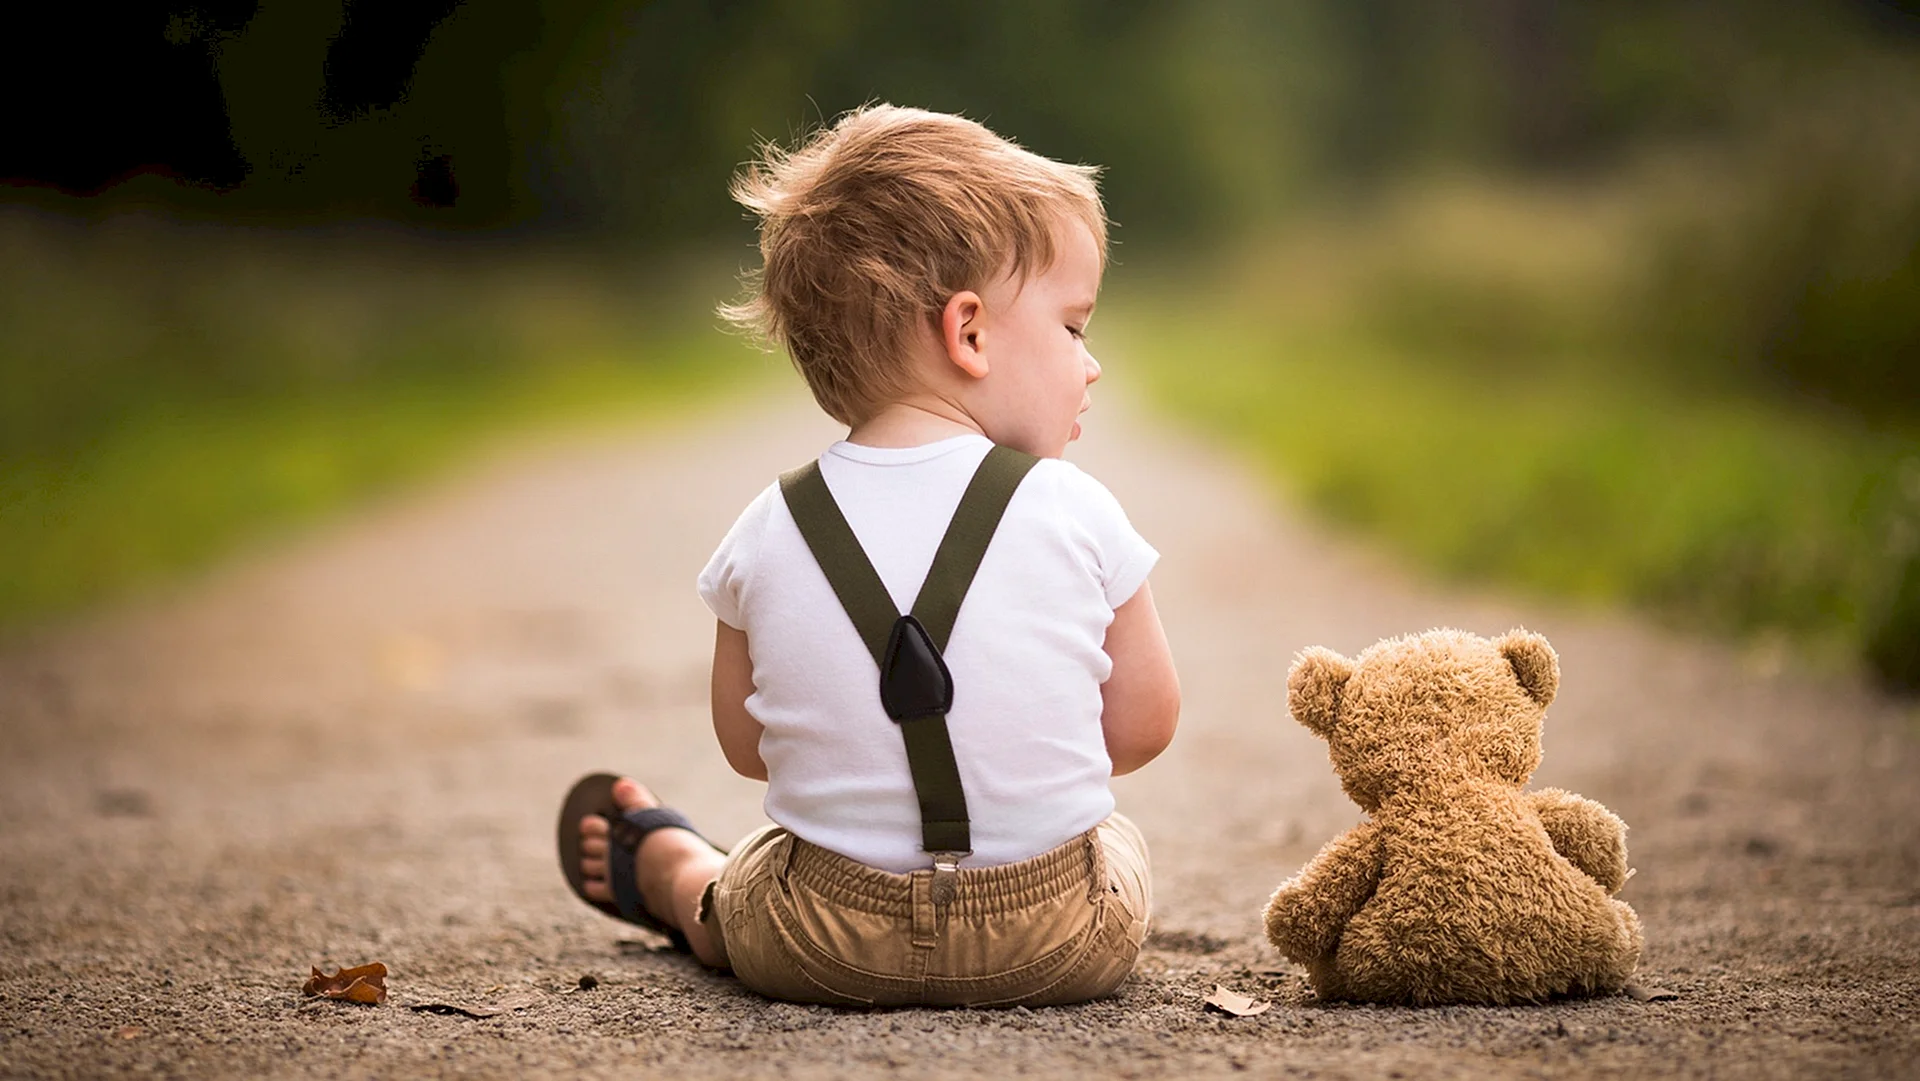 Child With Teddy Bear Wallpaper